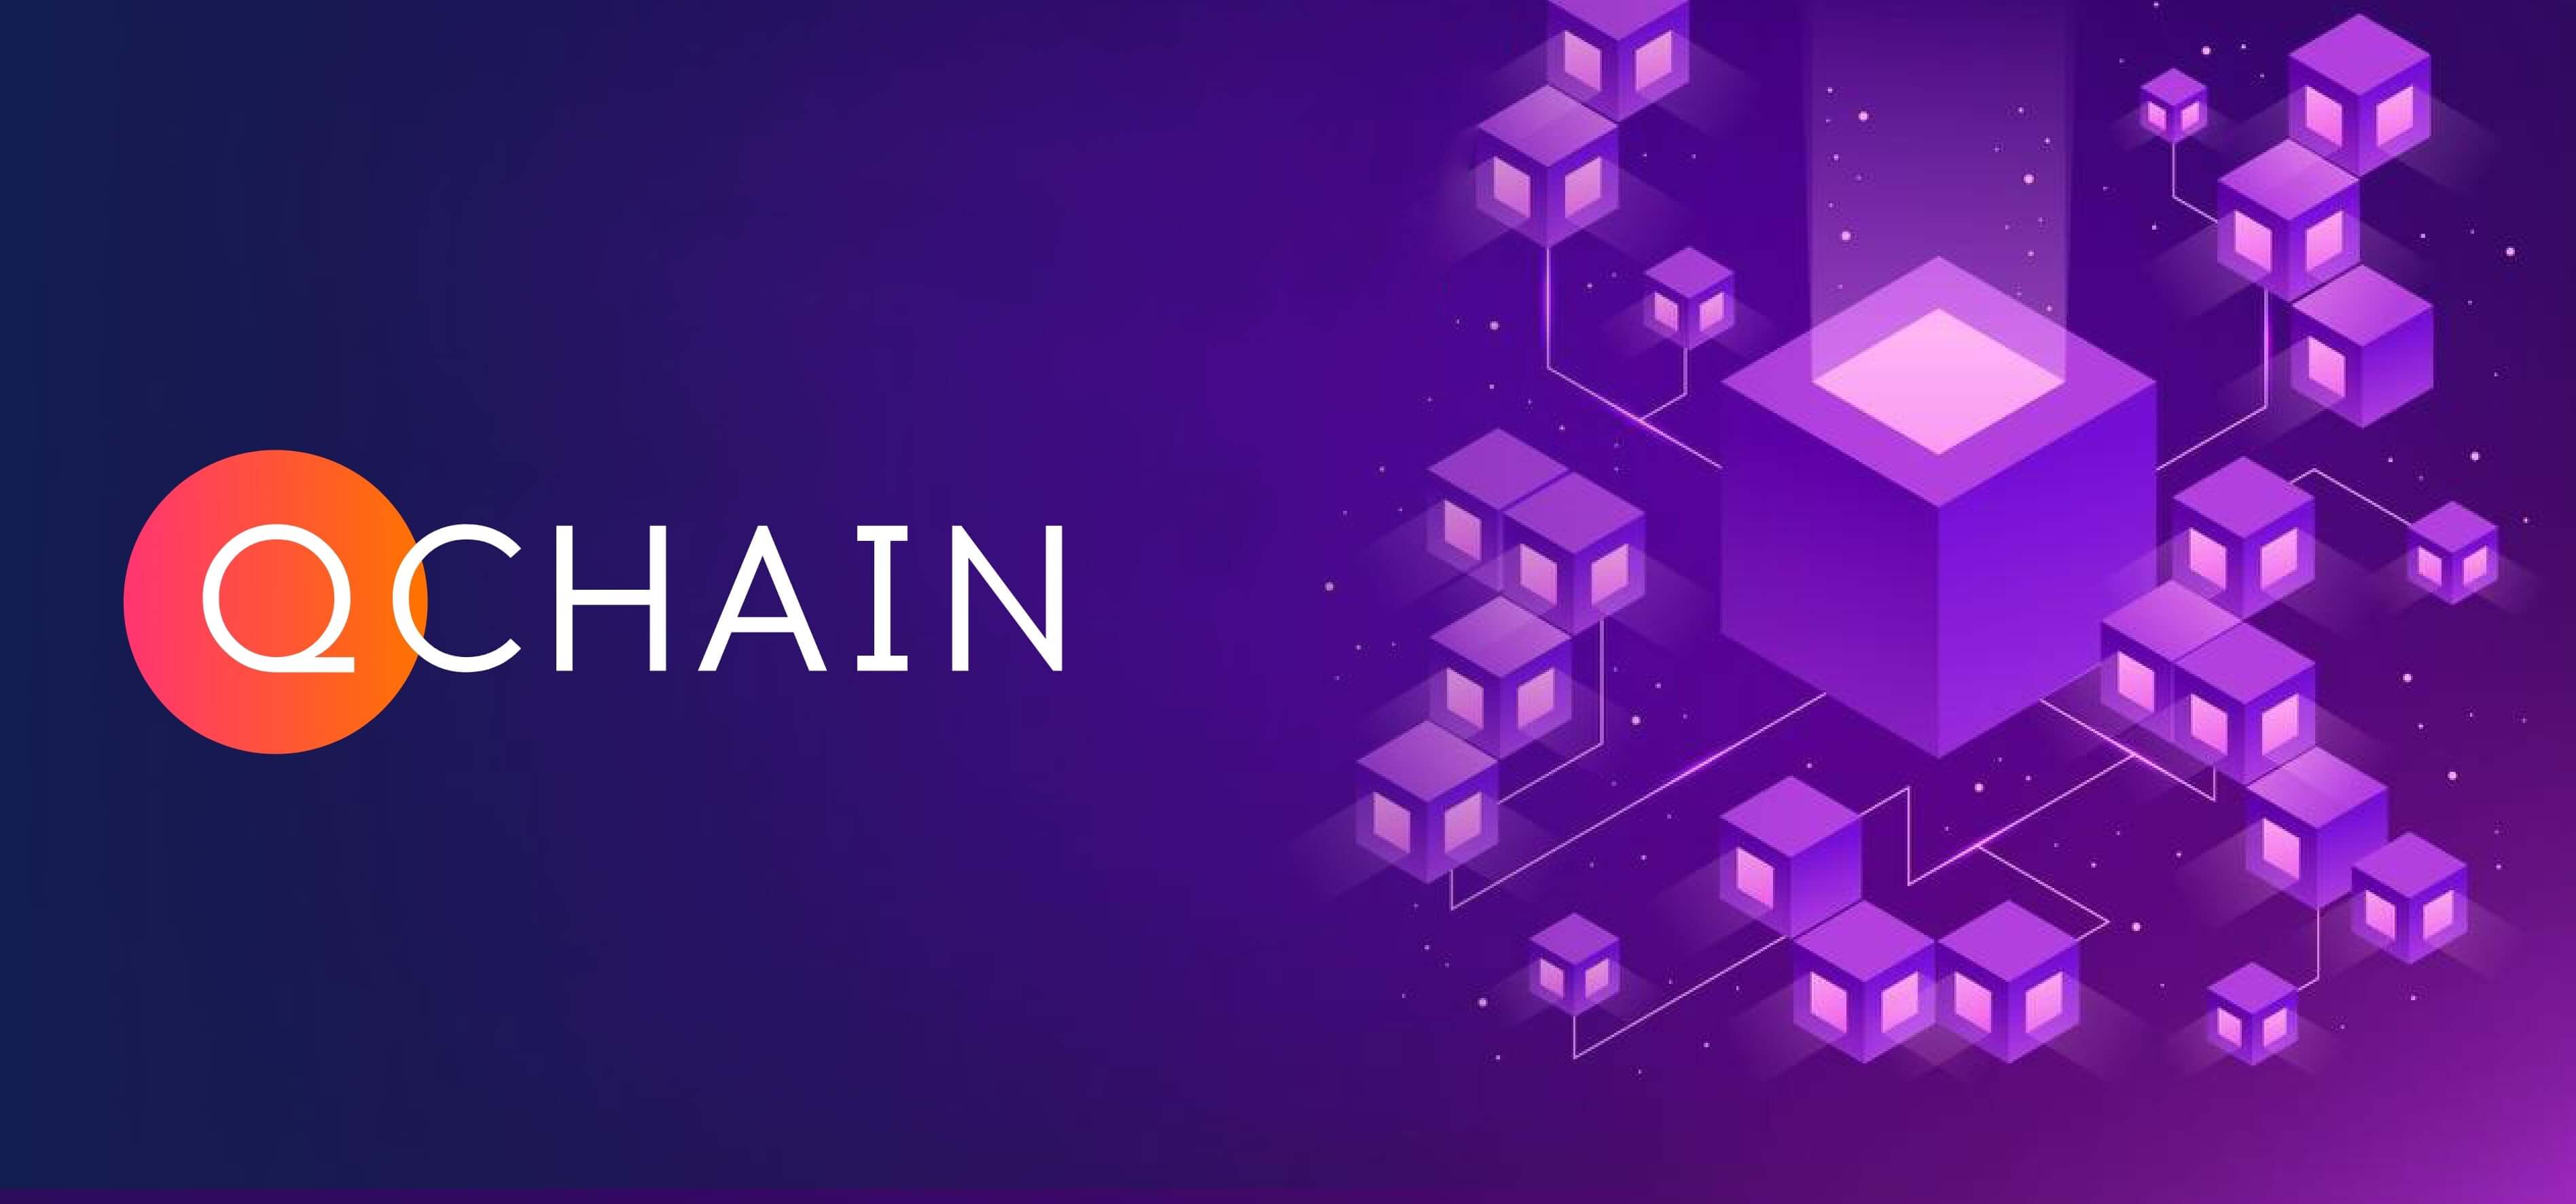 Qchain is the future that has already come!